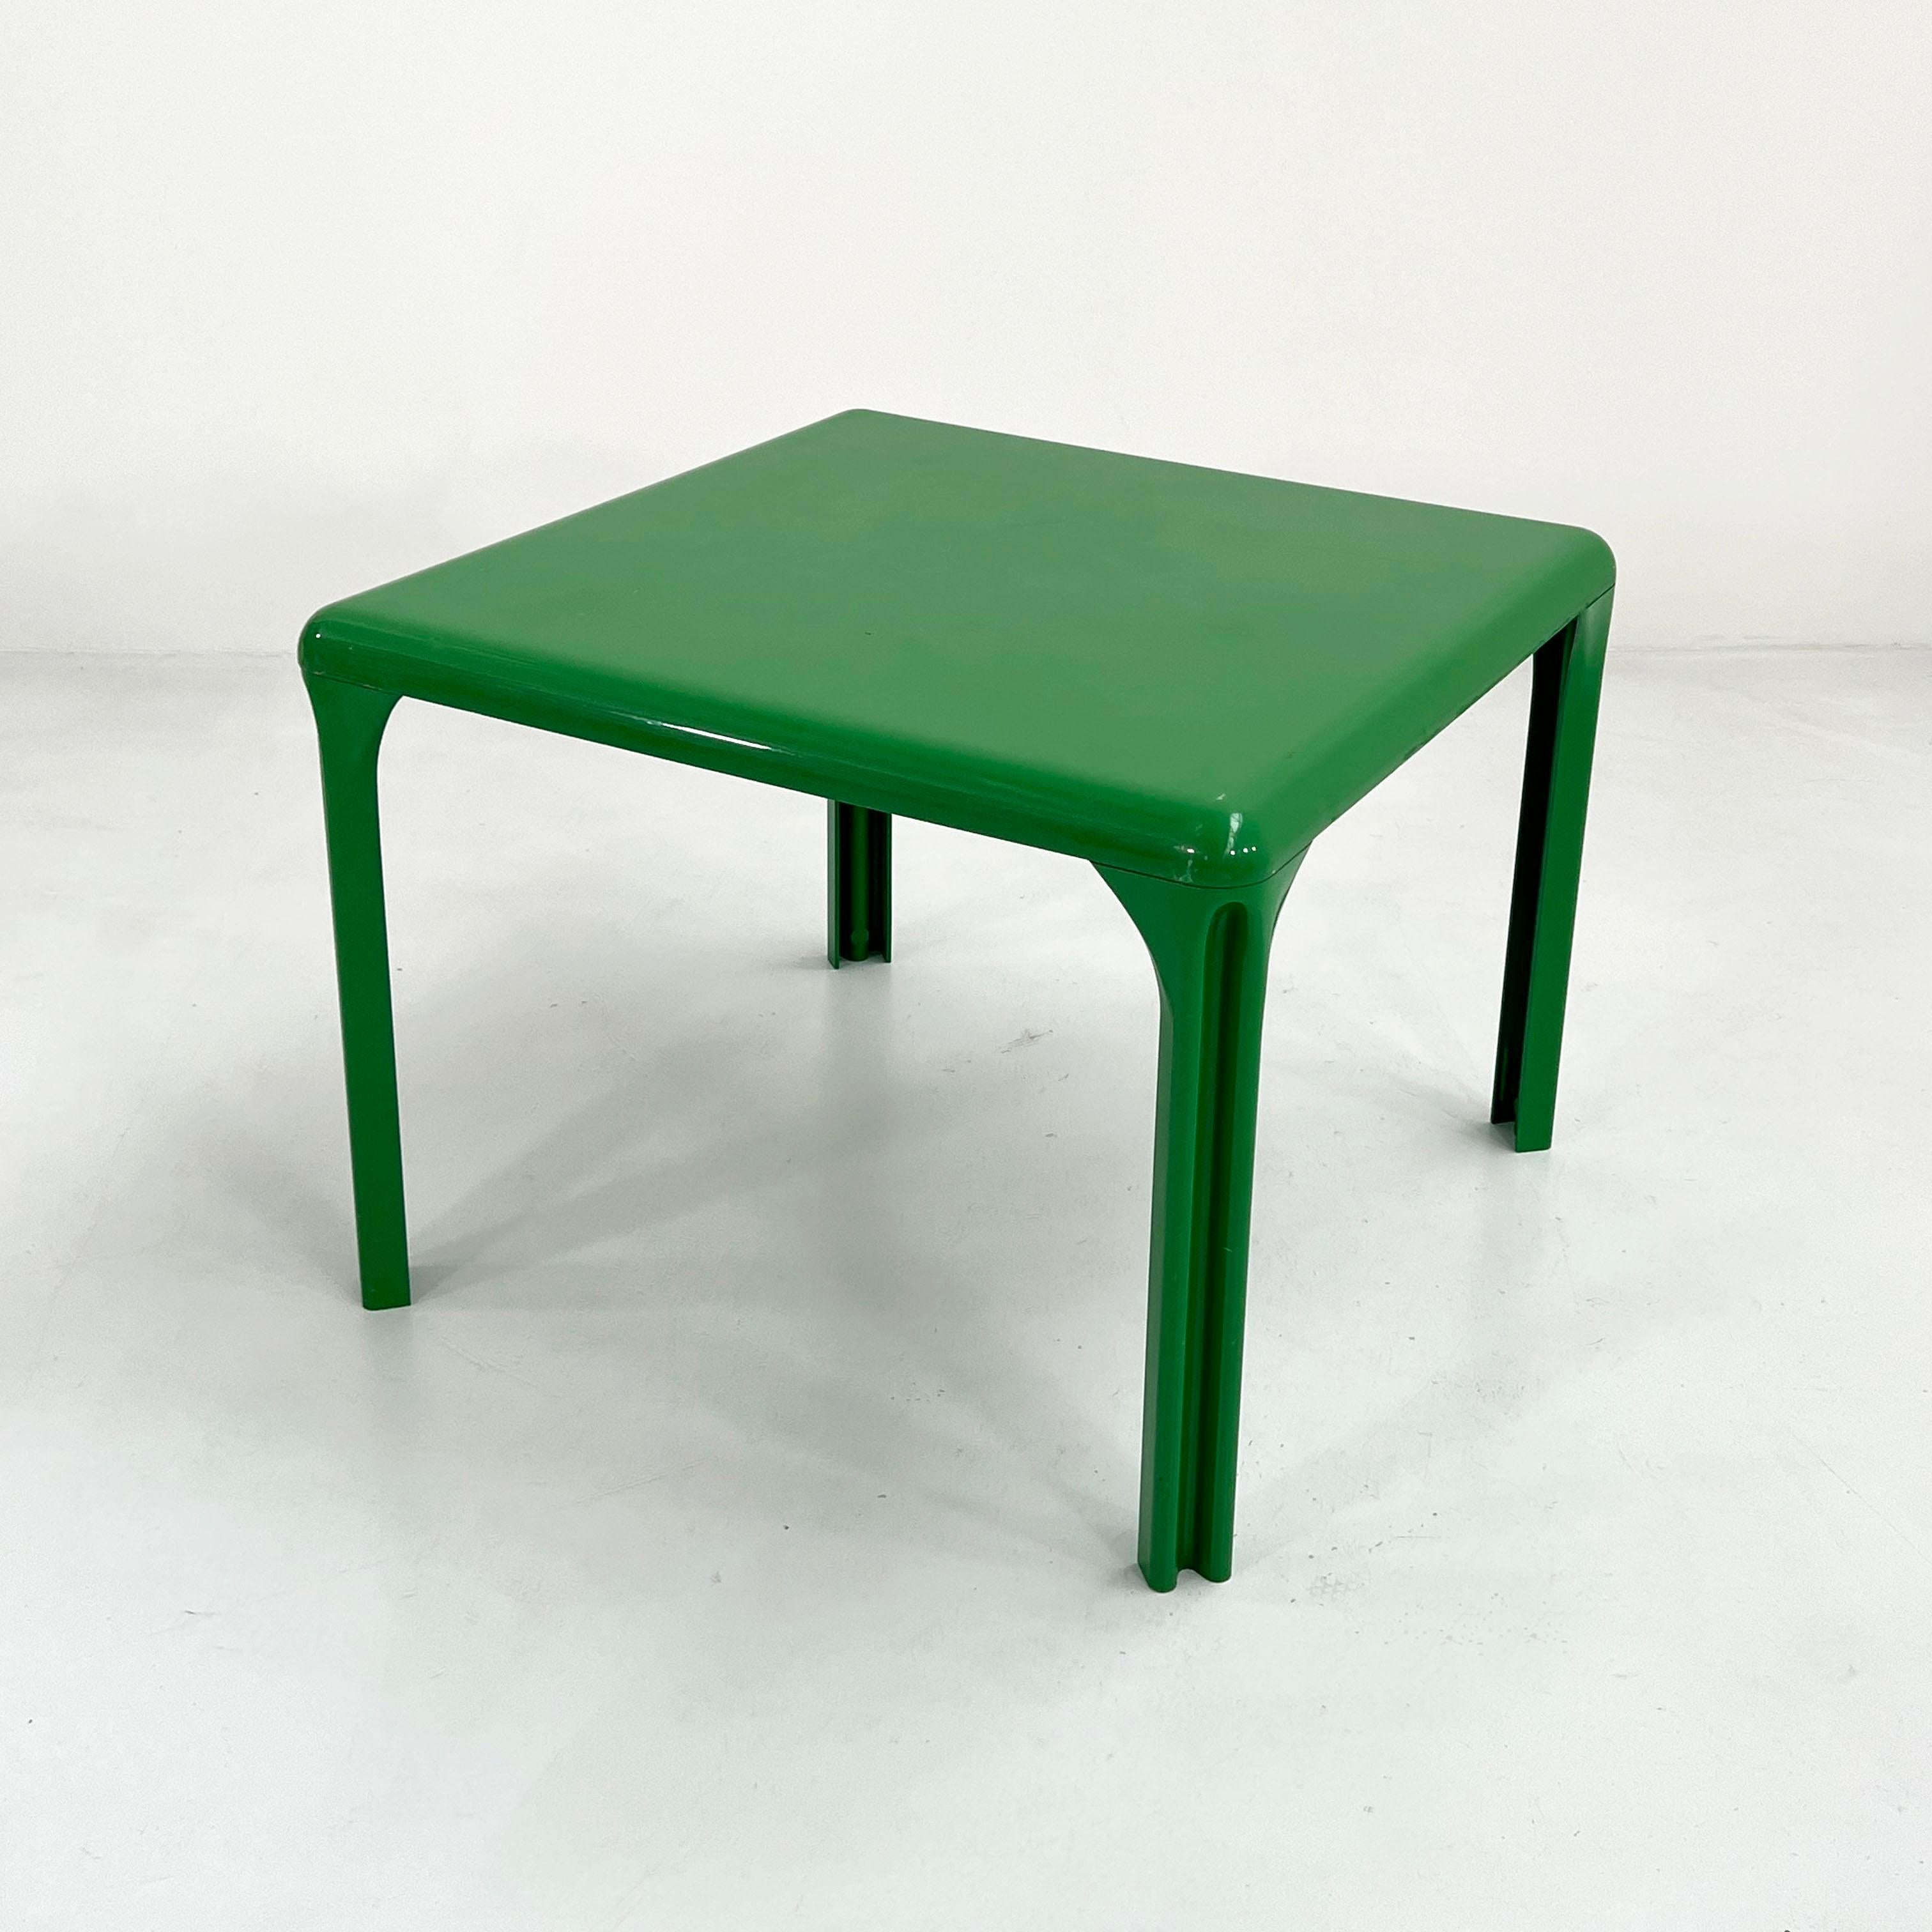 Designer - Vico Magistretti
Producer - Artemide
Model - Stadio 100 Dining Table 
Design Period - Seventies
Measurements - Width 95 cm x Depth 95 cm x Height 70 cm
Materials - Plastic
Color - Green
Light wear consistent with age and use. Some scuffs